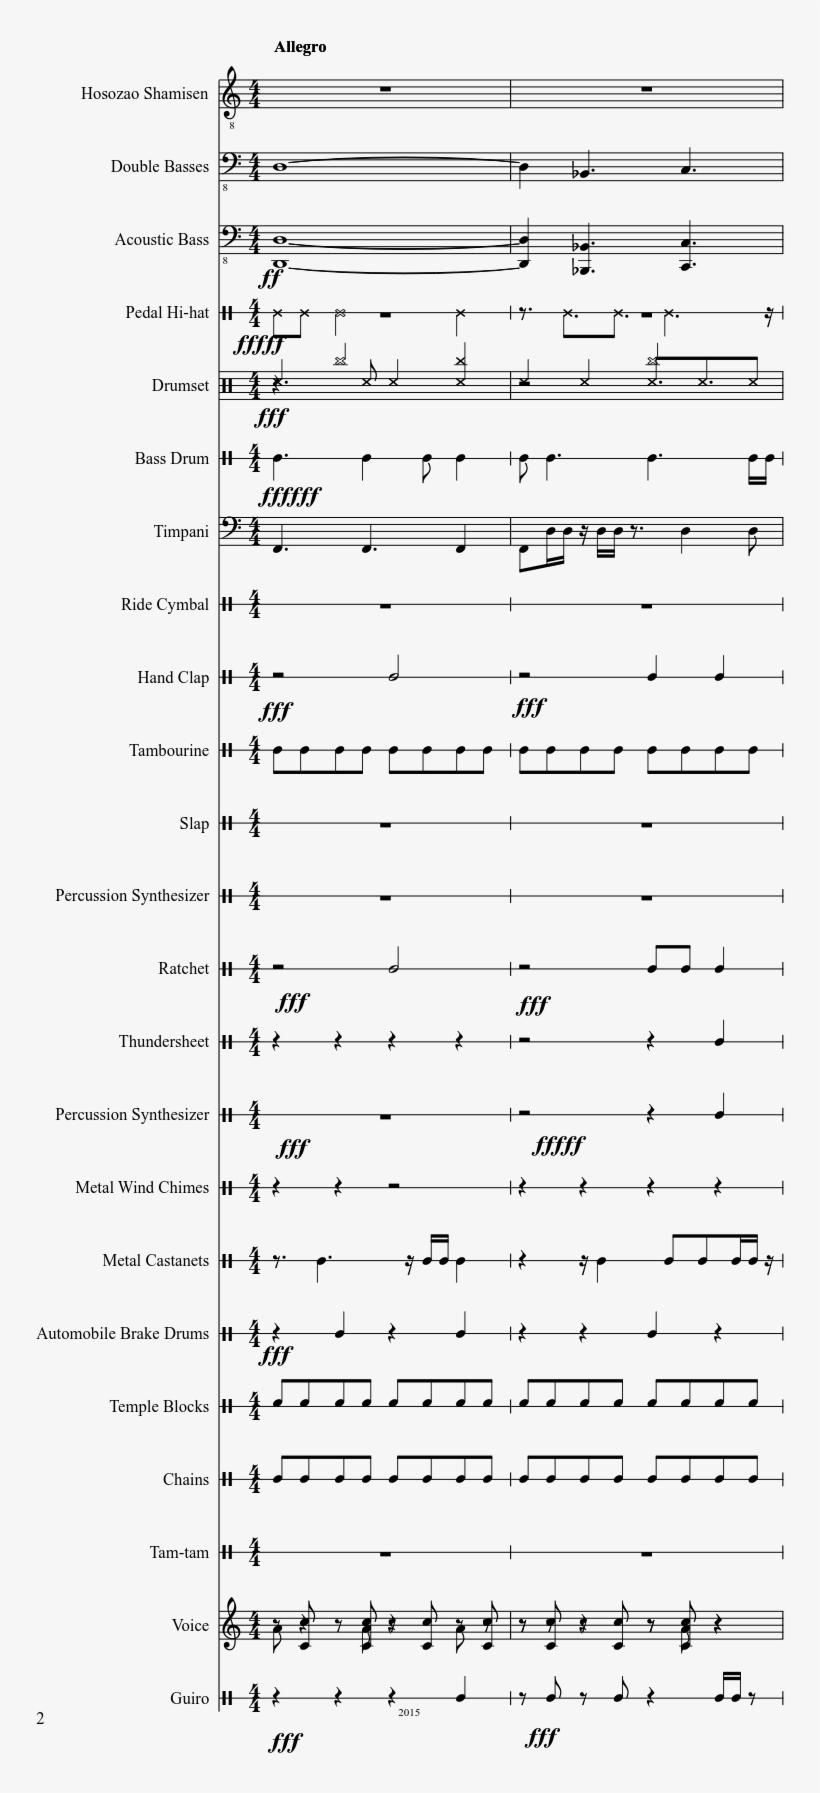 When Will Someone Like You Be Mine Sheet Music Composed - Sheet Music, transparent png #3422207